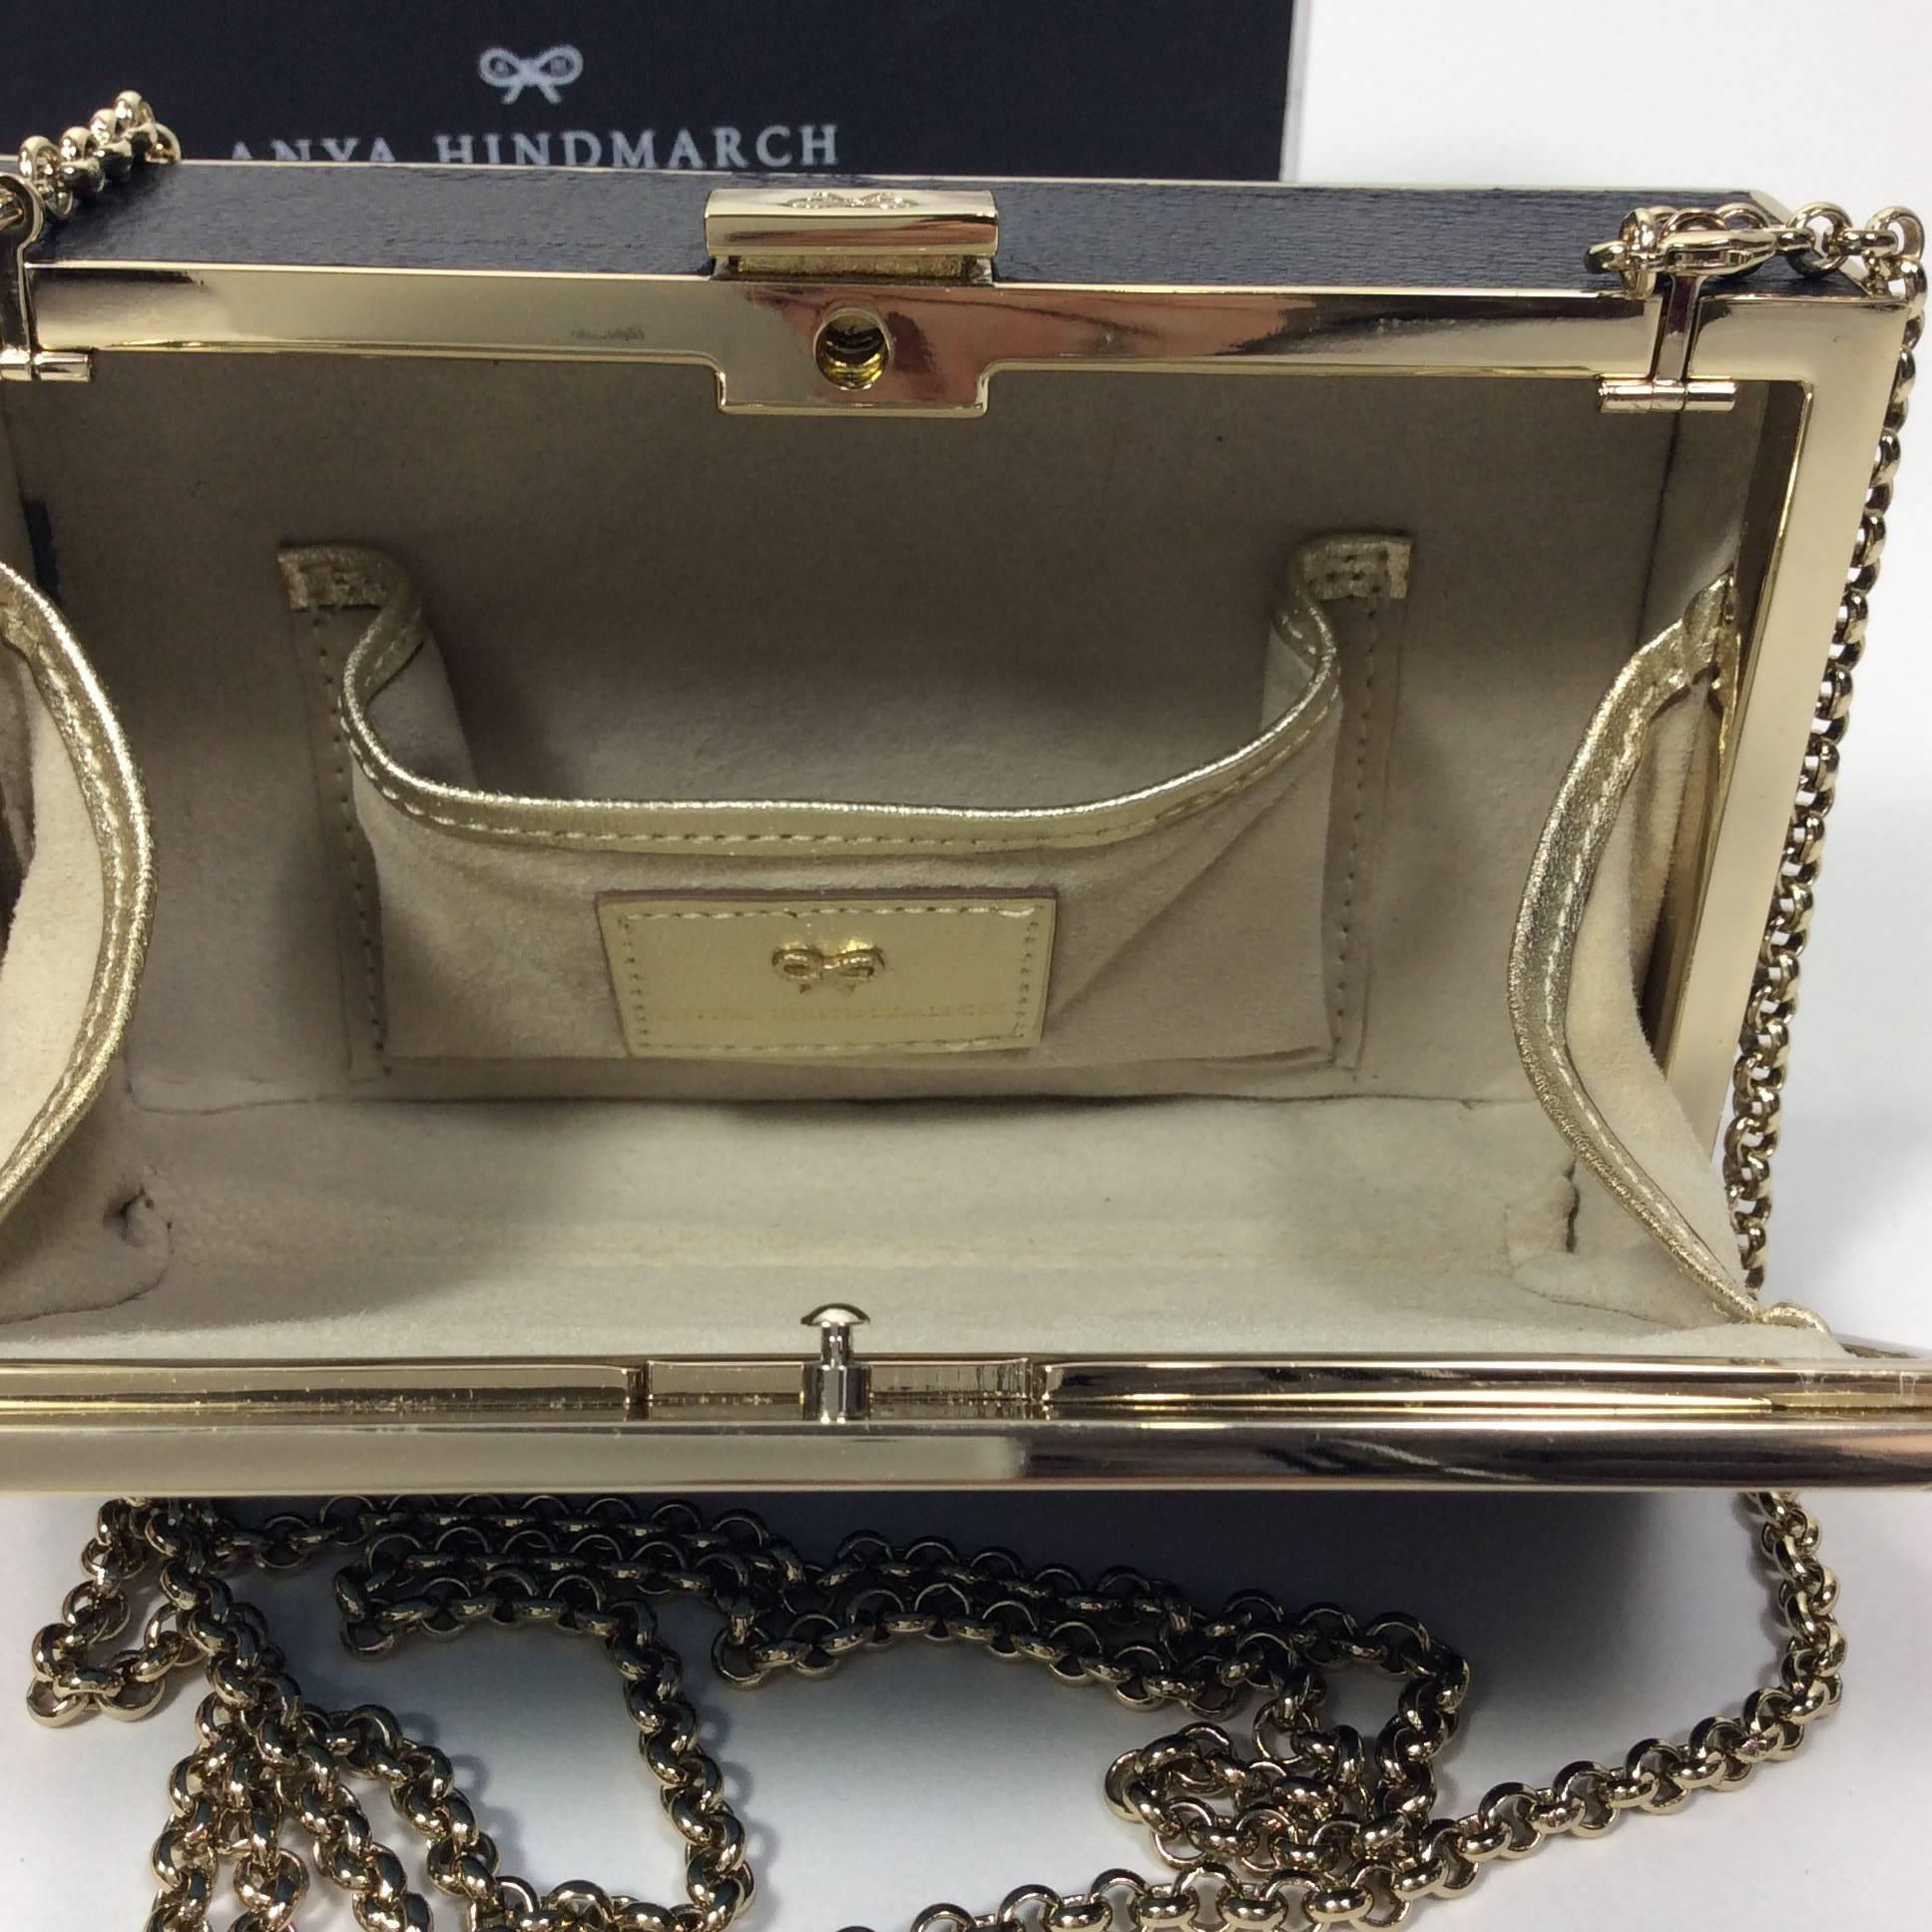 Anya Hindmarch Stop Staring at My Handbag Evening Clutch. The bag is inlaid with embossed leather trim and suede interior. The chain strap drop is 24